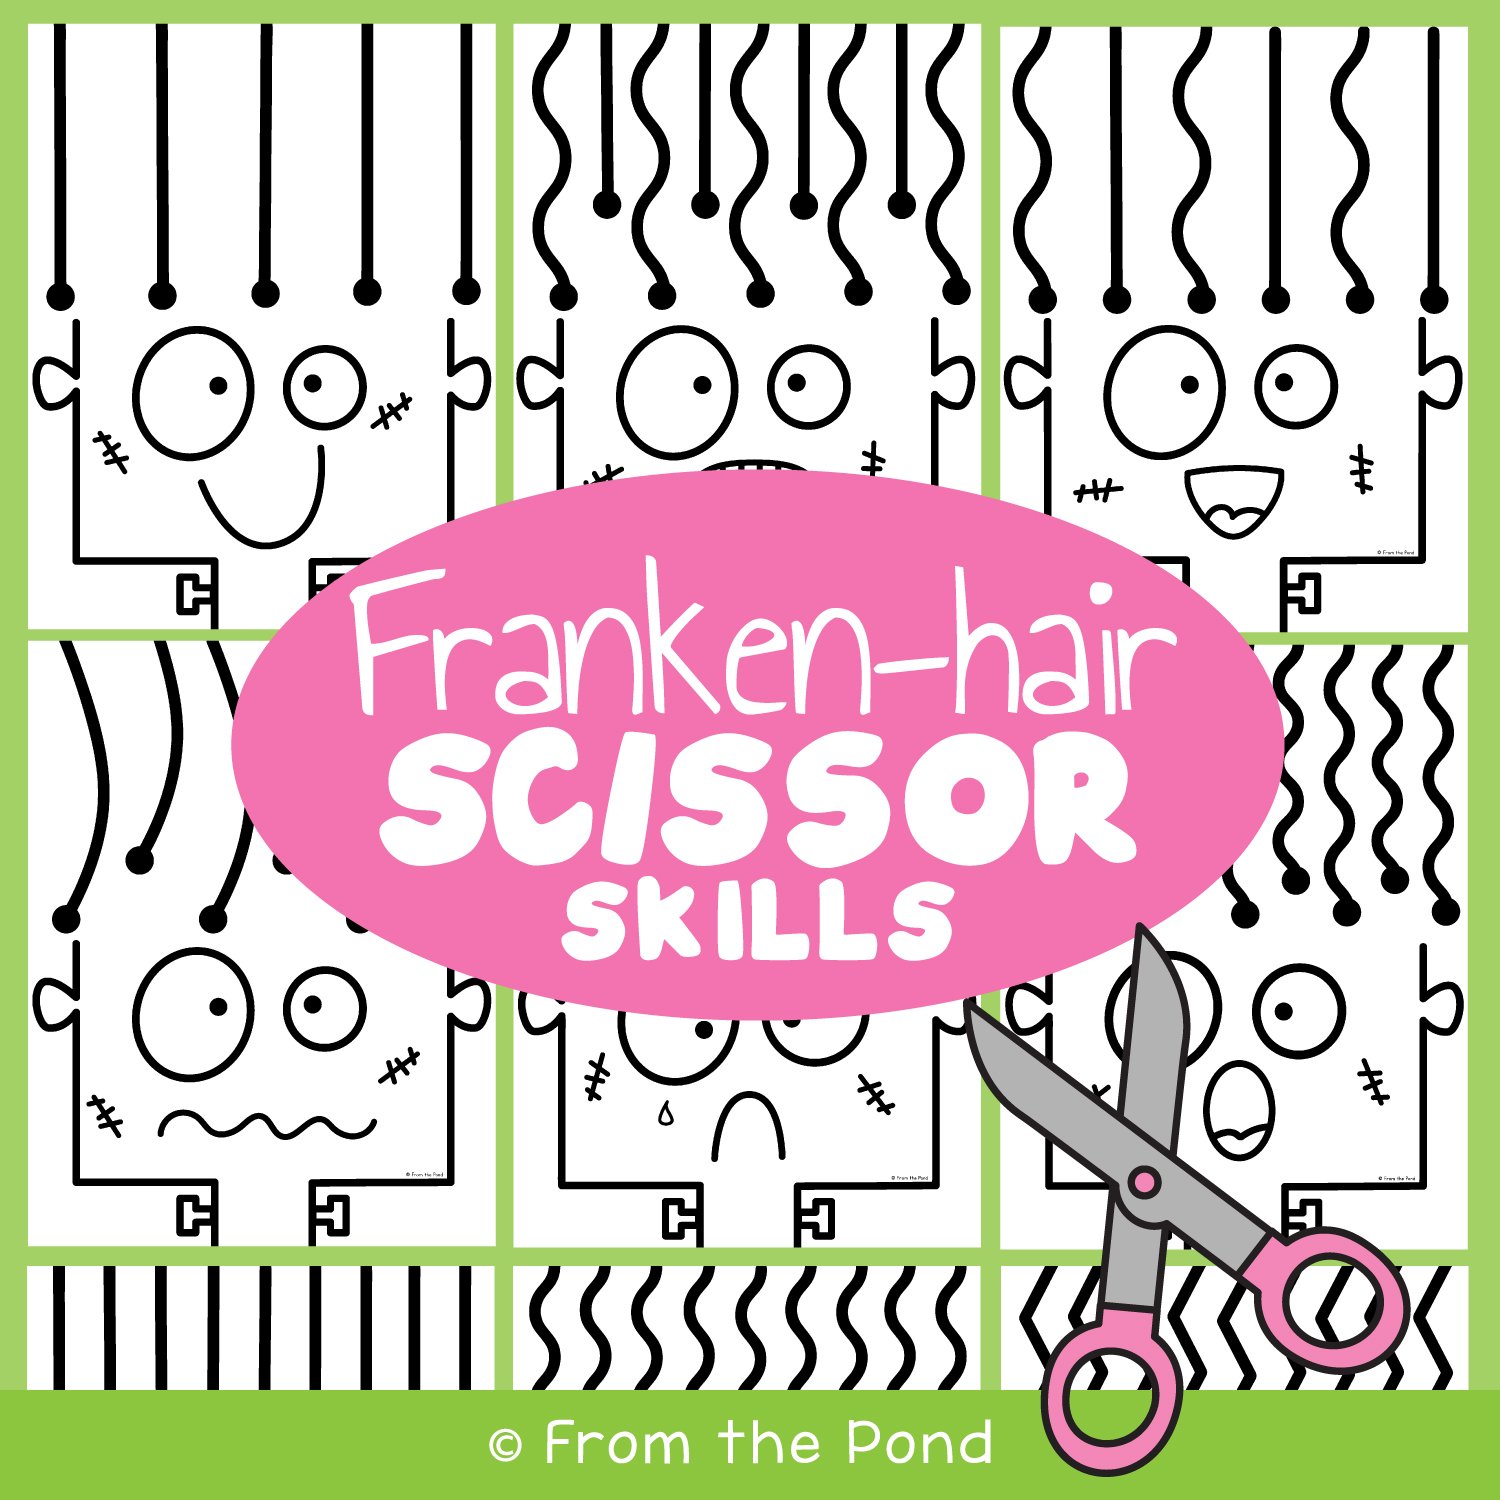 Fun pages to practice cutting and scissor skills for preschool and  kindergarten. — From the Pond